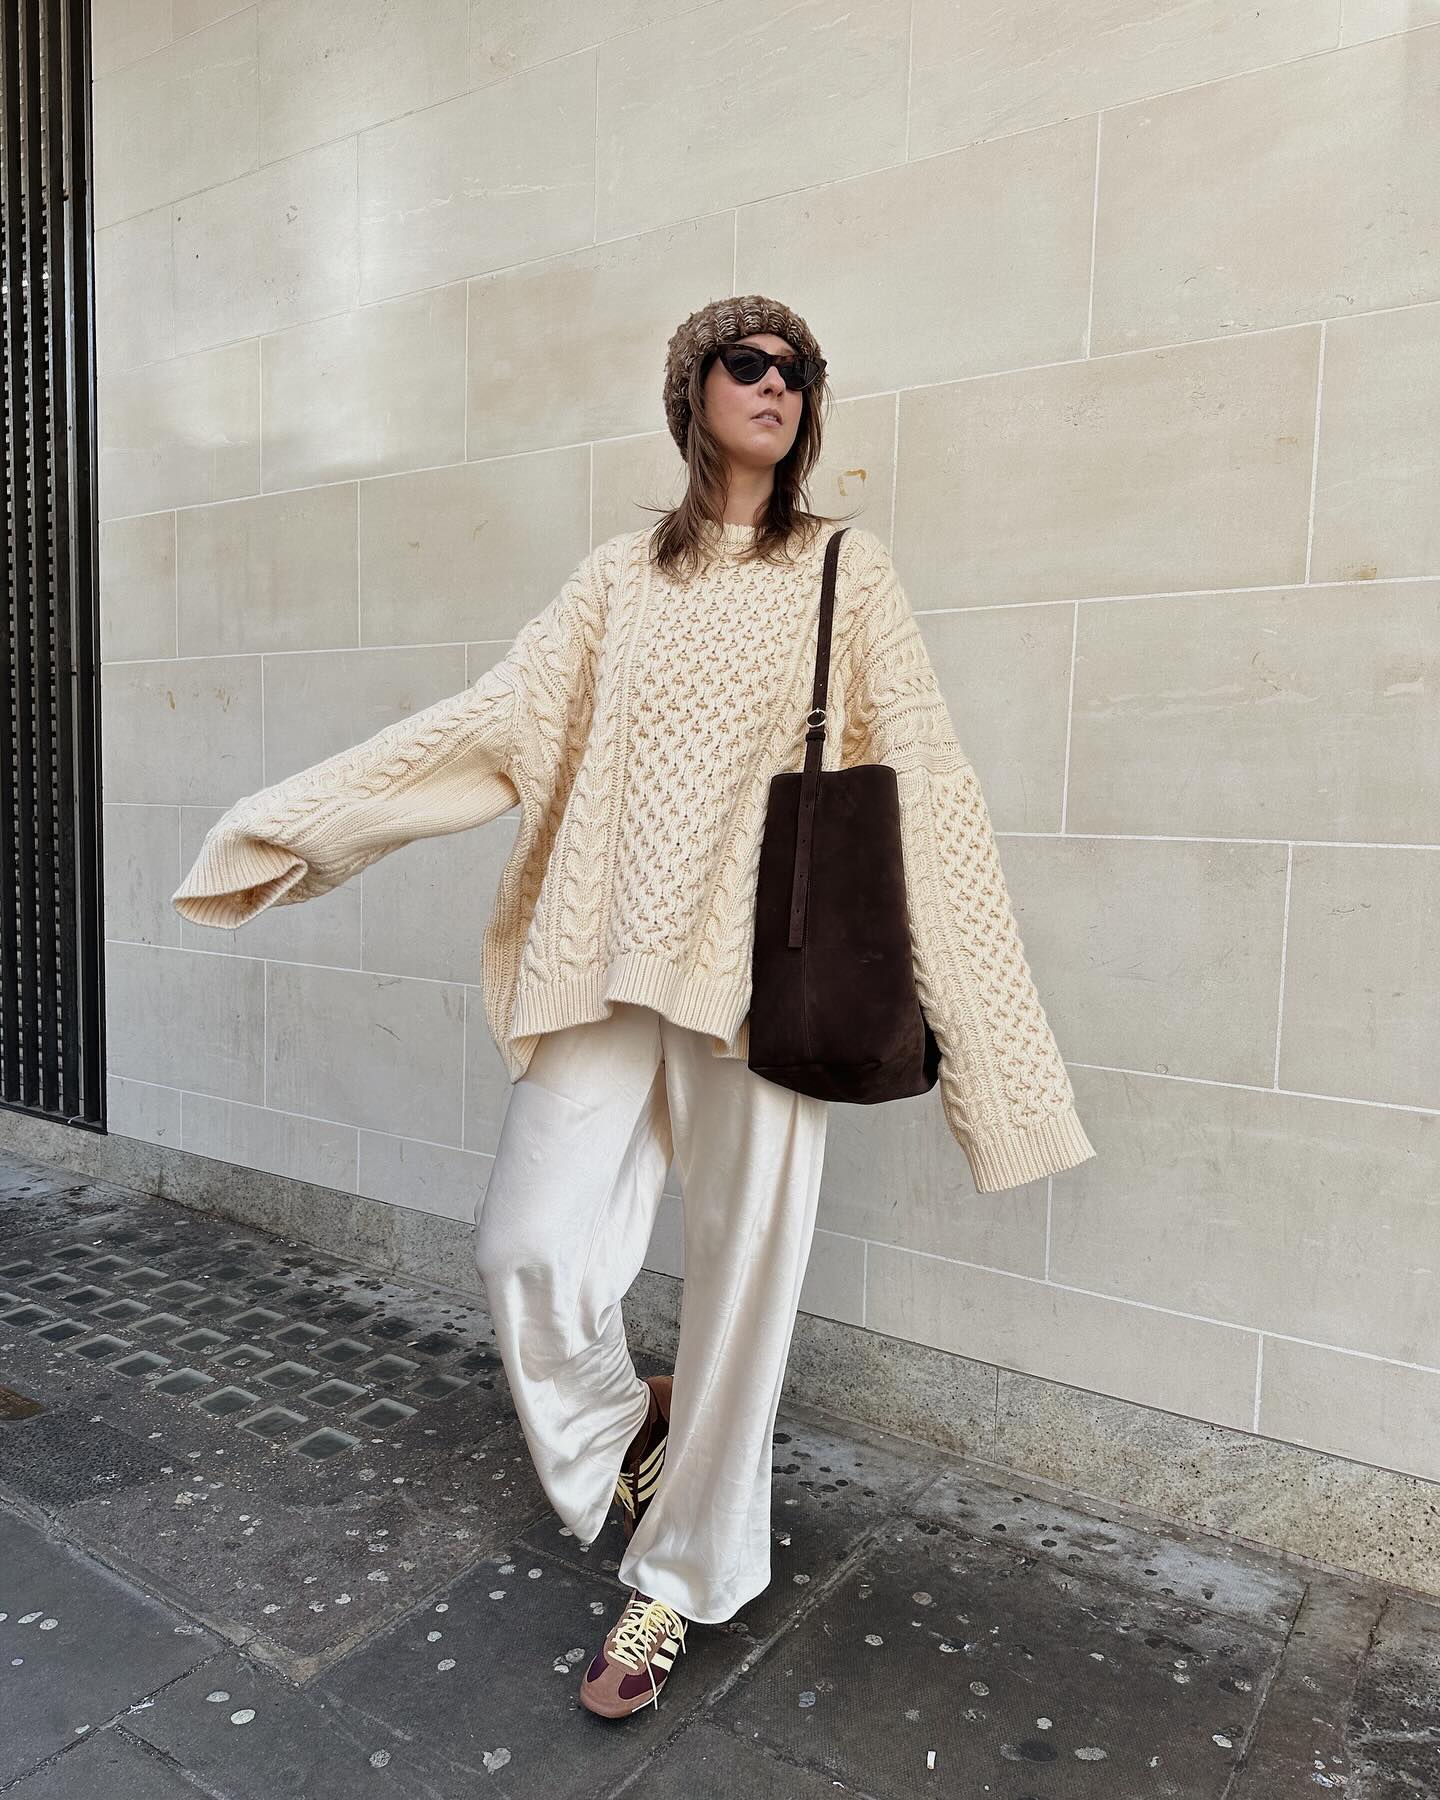 Spring trainer outfits: @bubblyaquarius wears a cable-knit jumper with wide trousers and trainers